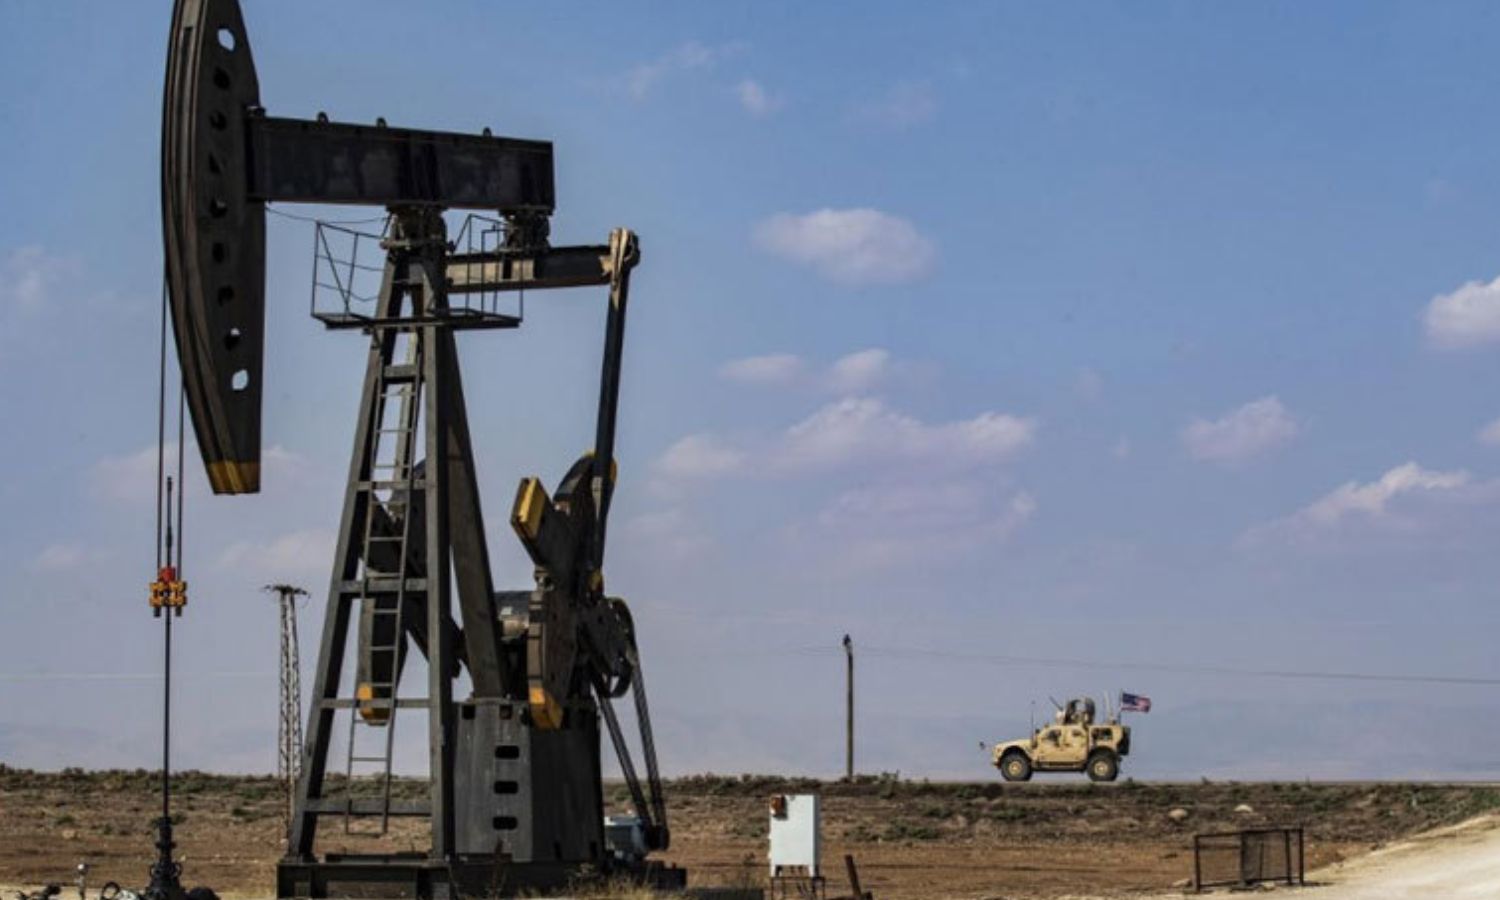 An American military vehicle passes near an oil rig in the countryside of the city of Qamishli, northeastern Syria - 26 October 2019 (AFP)